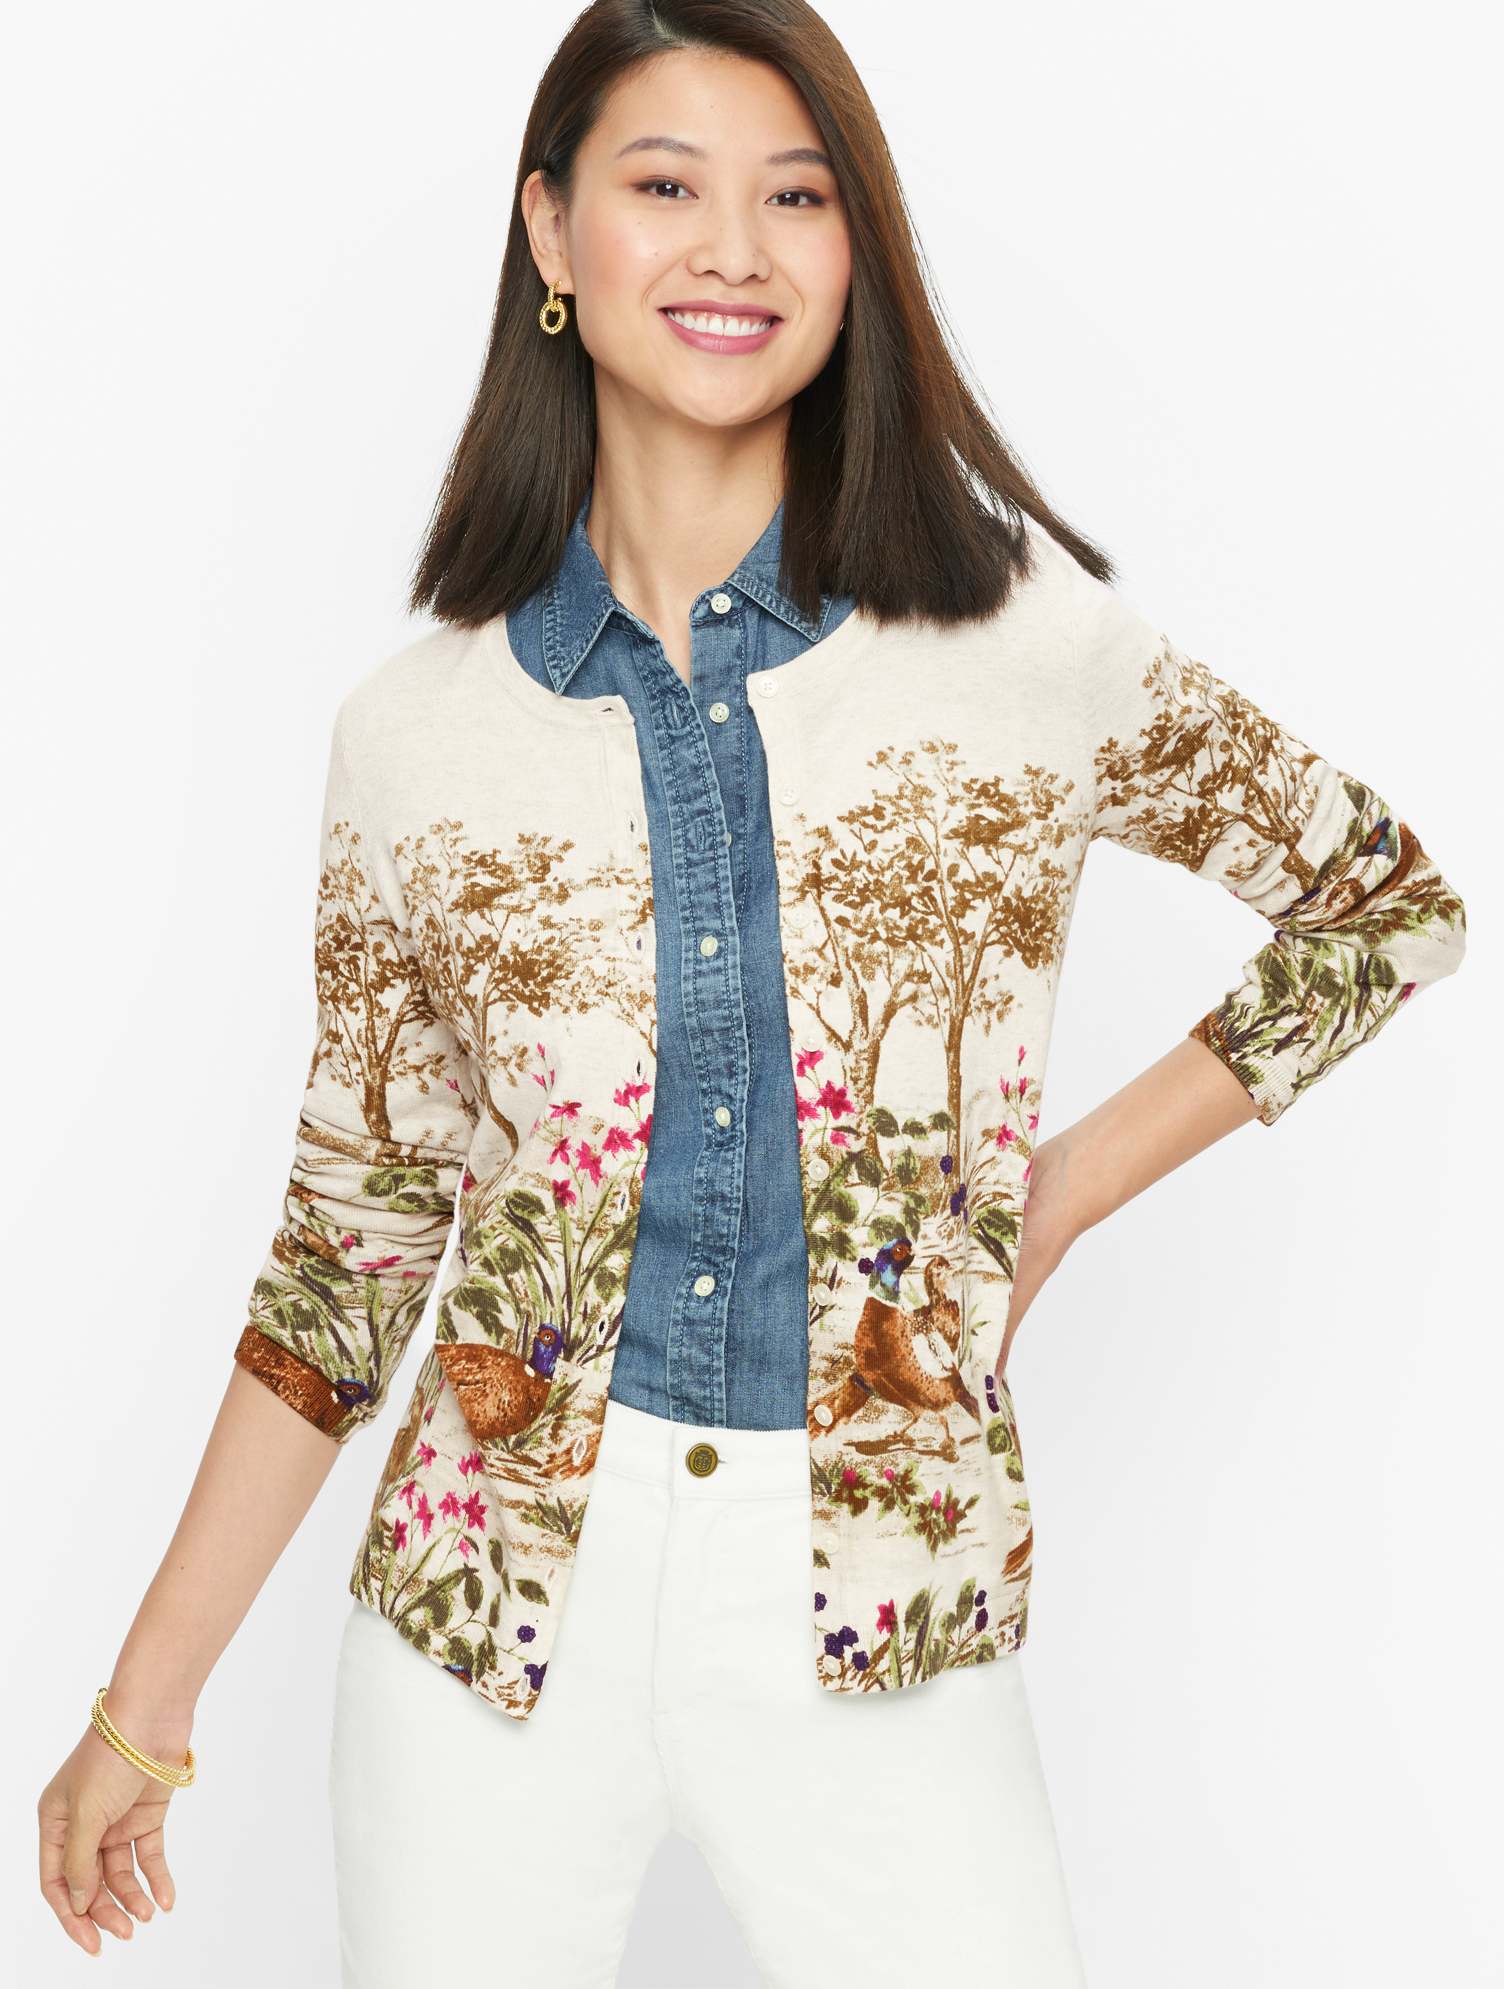 Charming Cardigan Sweater - Pheasant Garden - Oyster White - XS Talbots  from Talbots | AccuWeather Shop